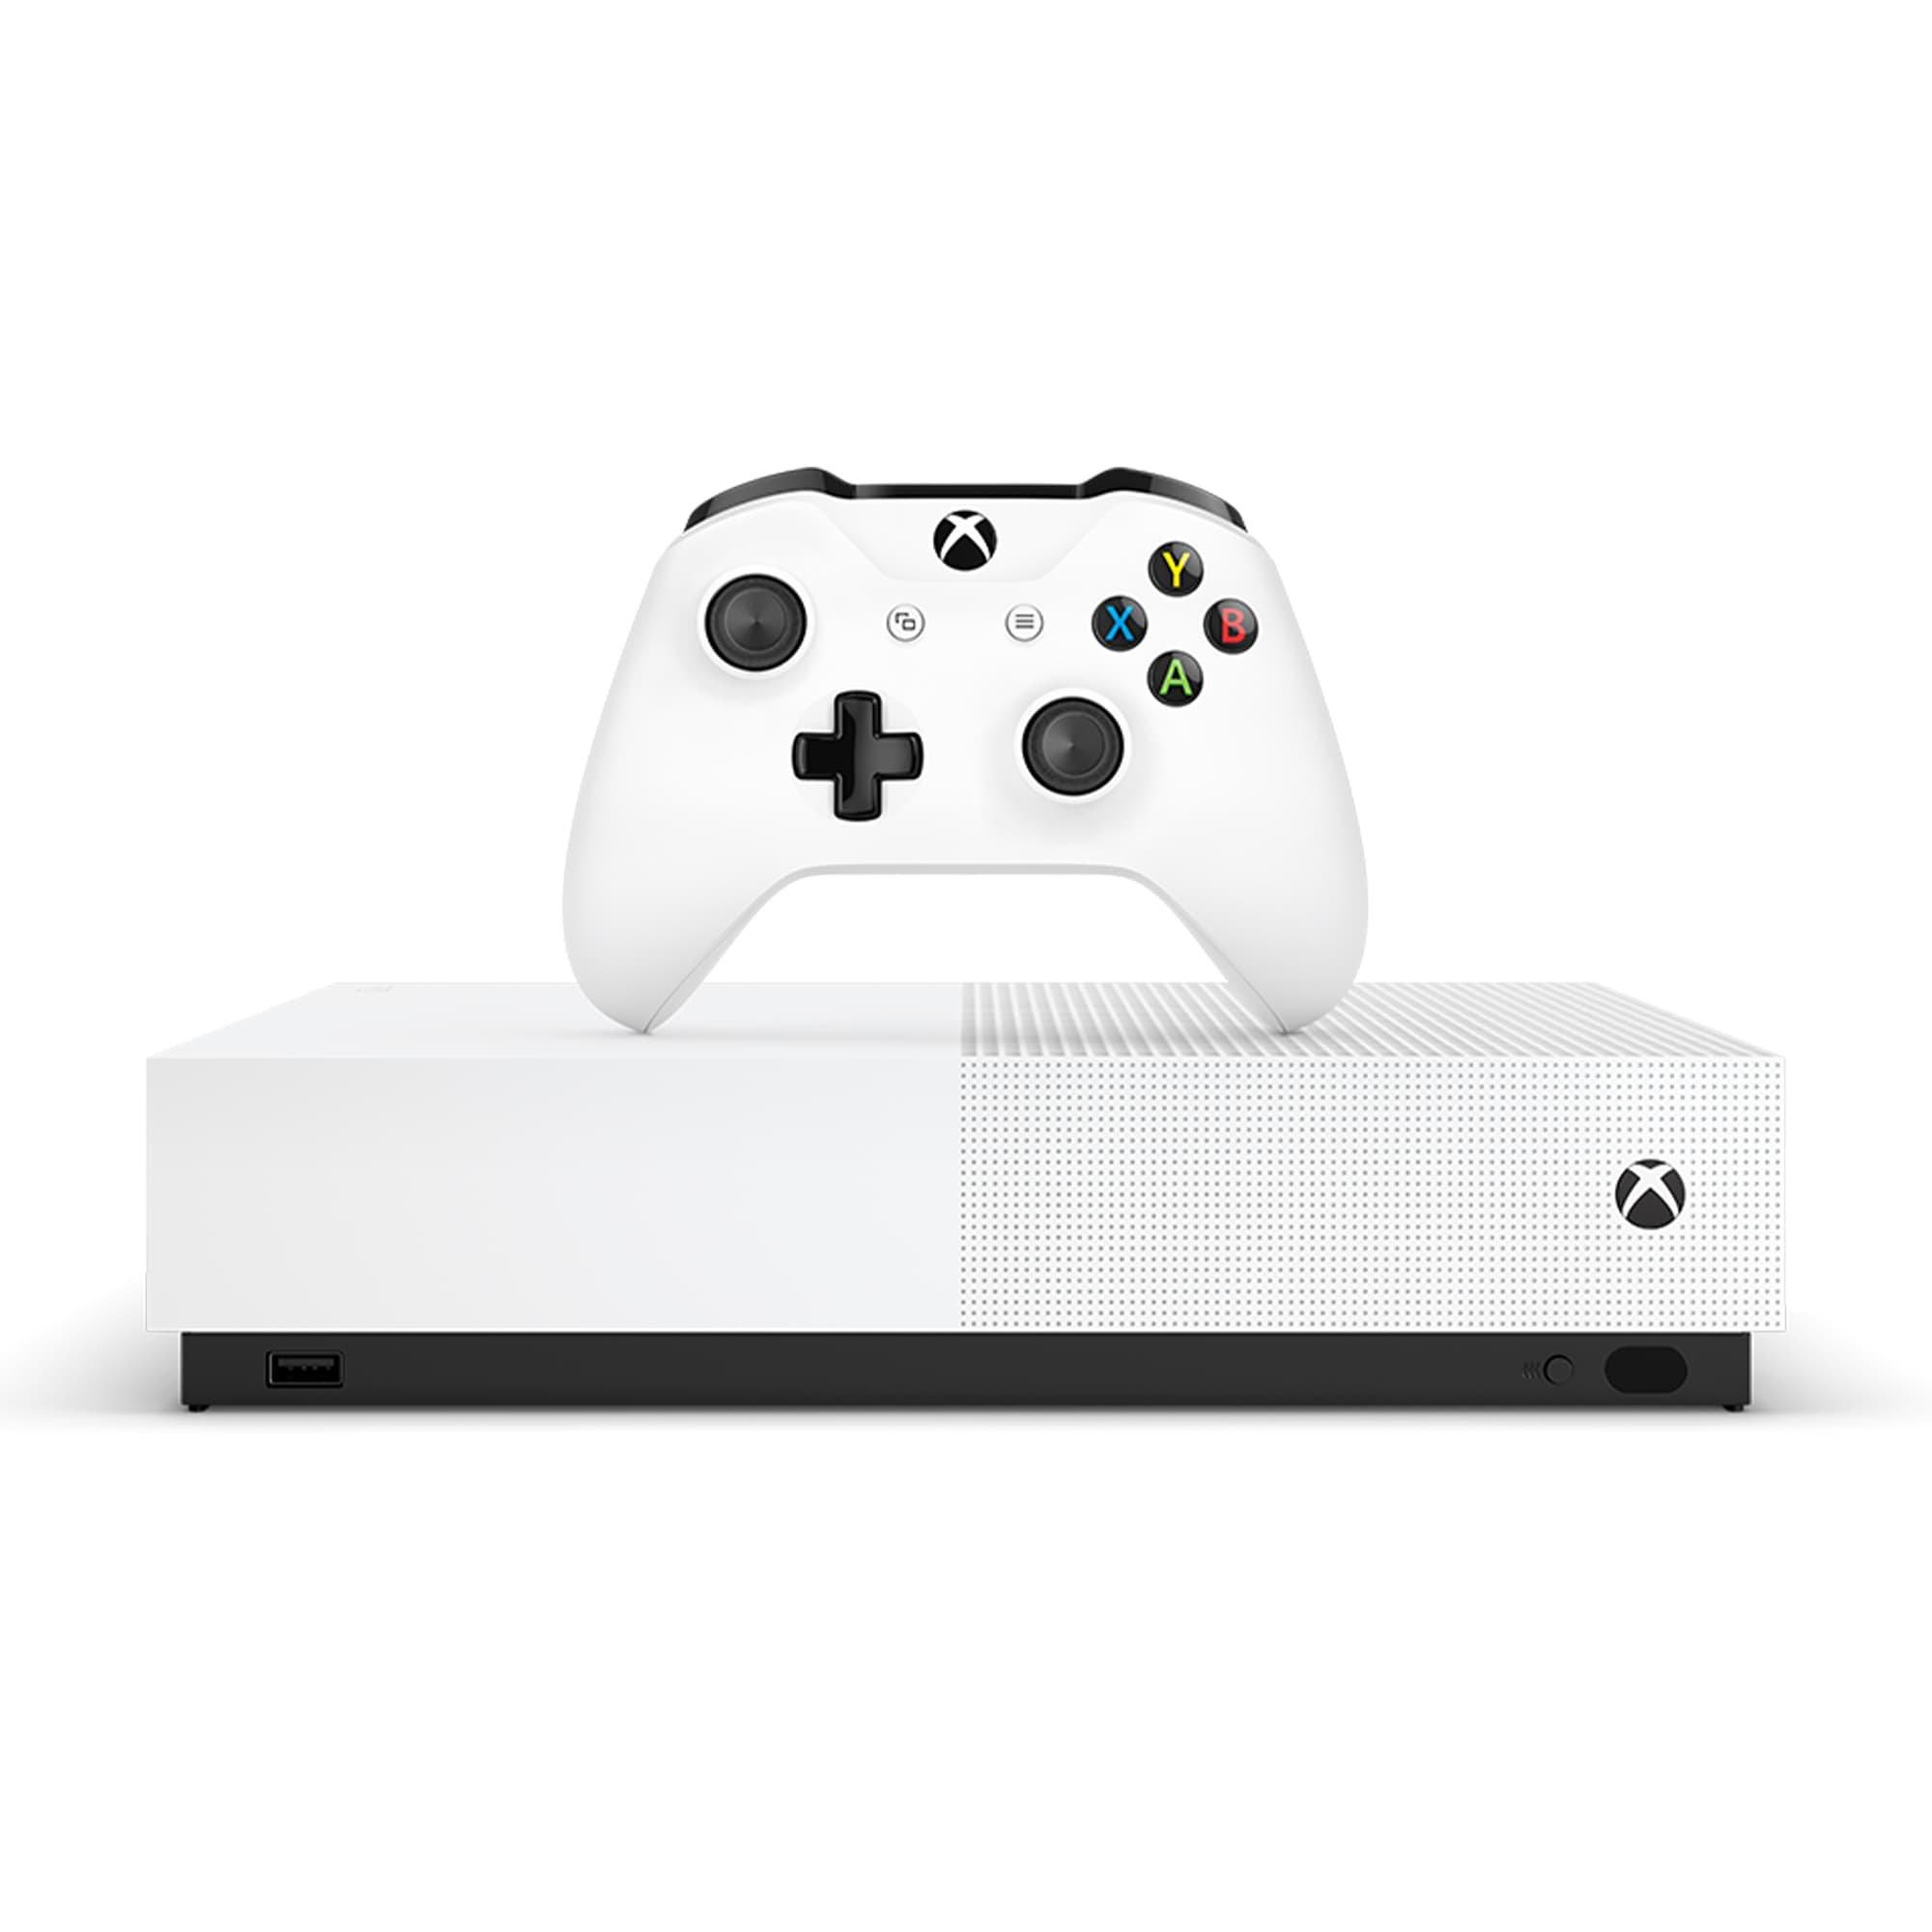 rent a center xbox one x